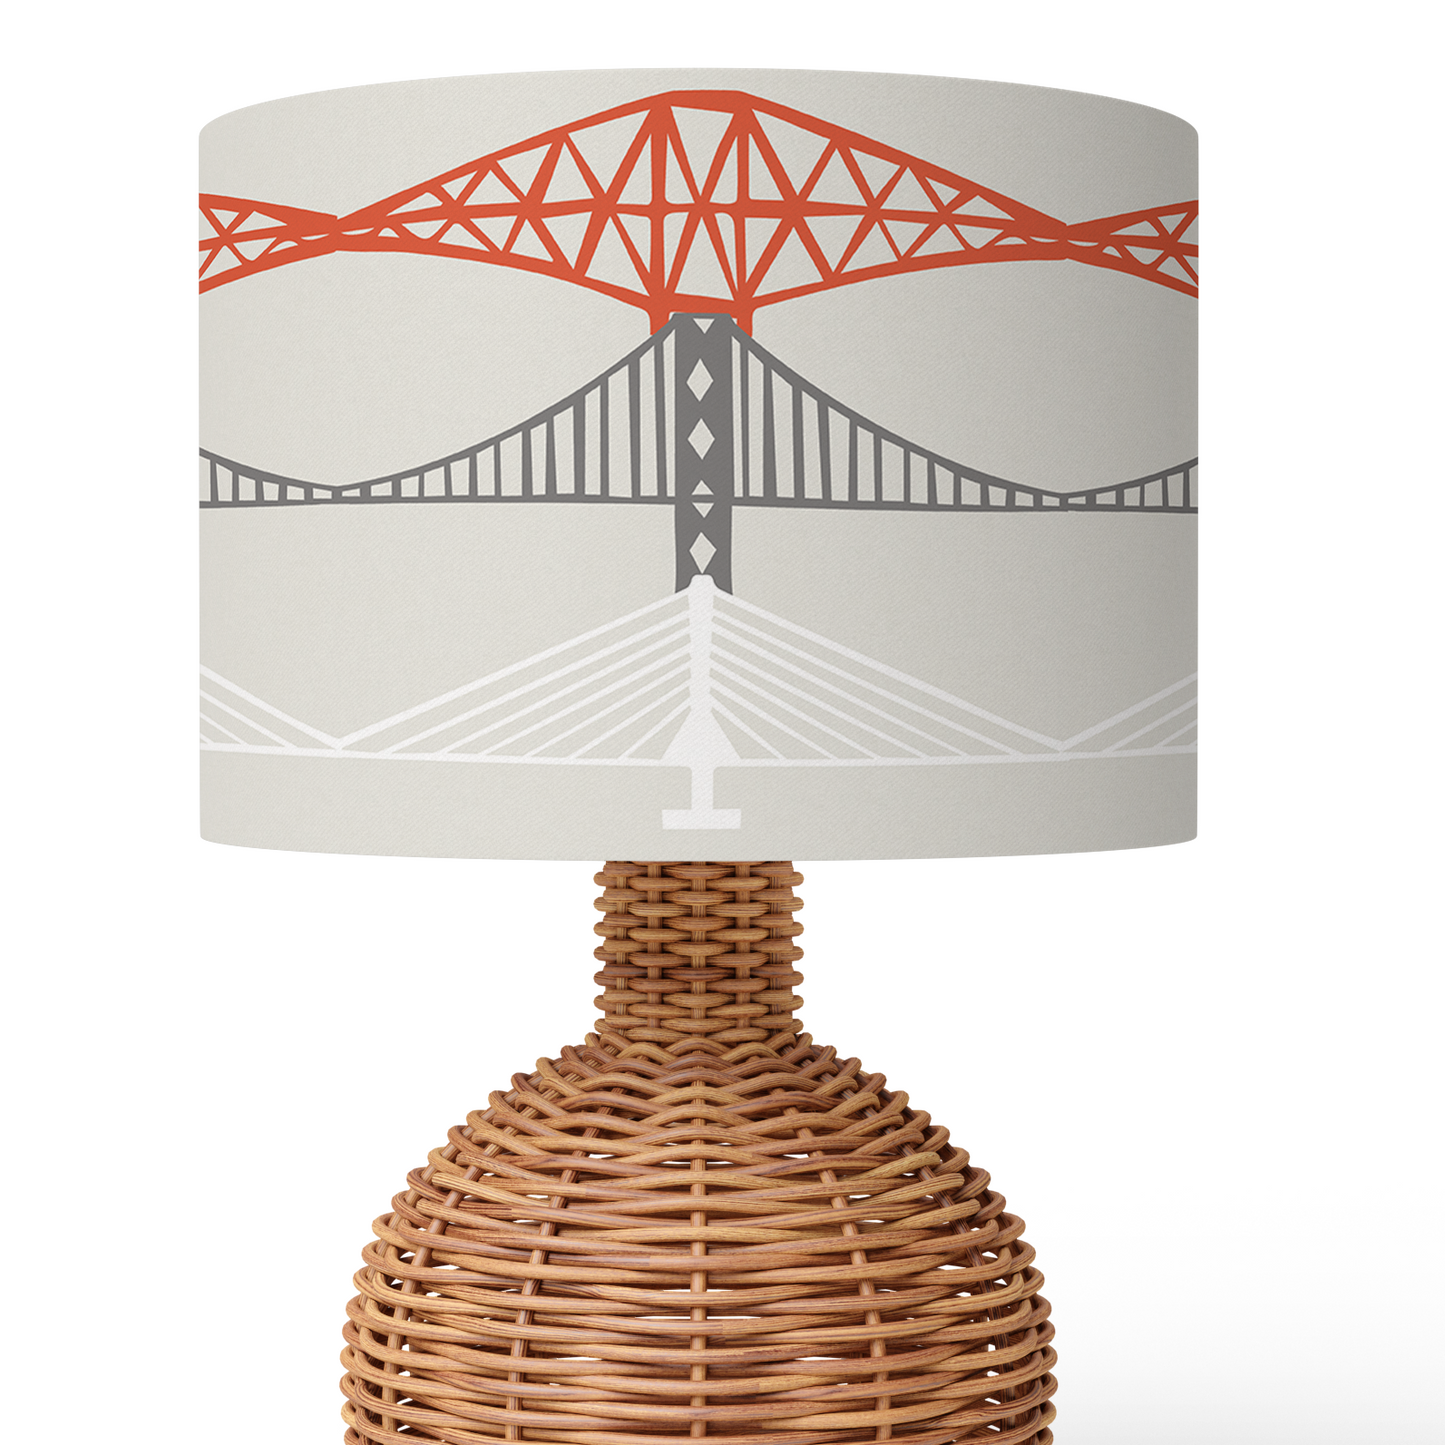 Forth Bridges Lampshade (Ceiling/Pendant or Table)